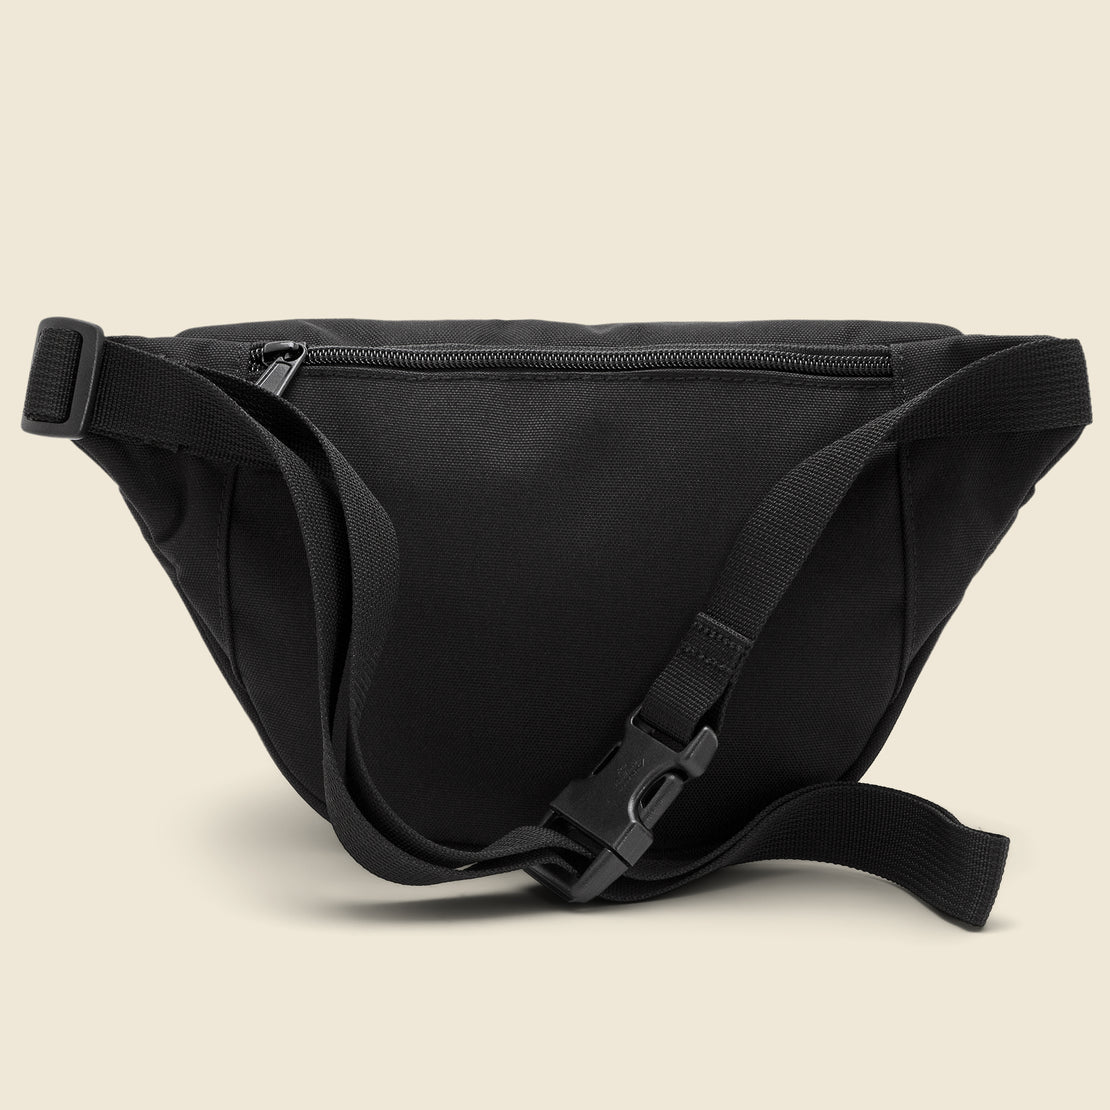 Jake Hip Bag - Black - Carhartt WIP - STAG Provisions - W - Accessories - Bag